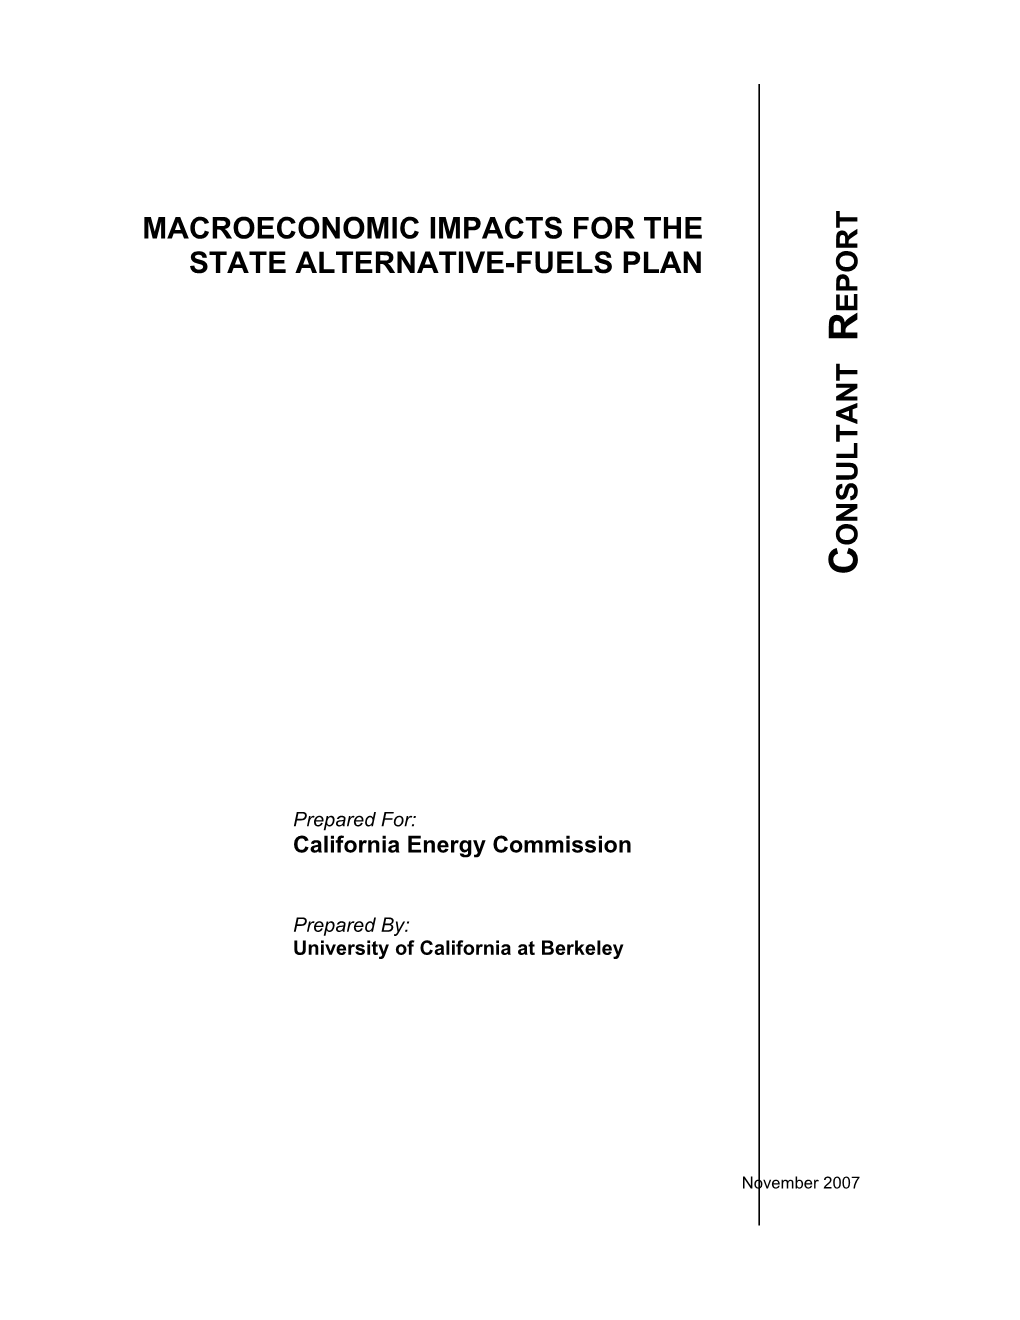 Macroeconomic Impacts for the State Alternative-Fuels Plan